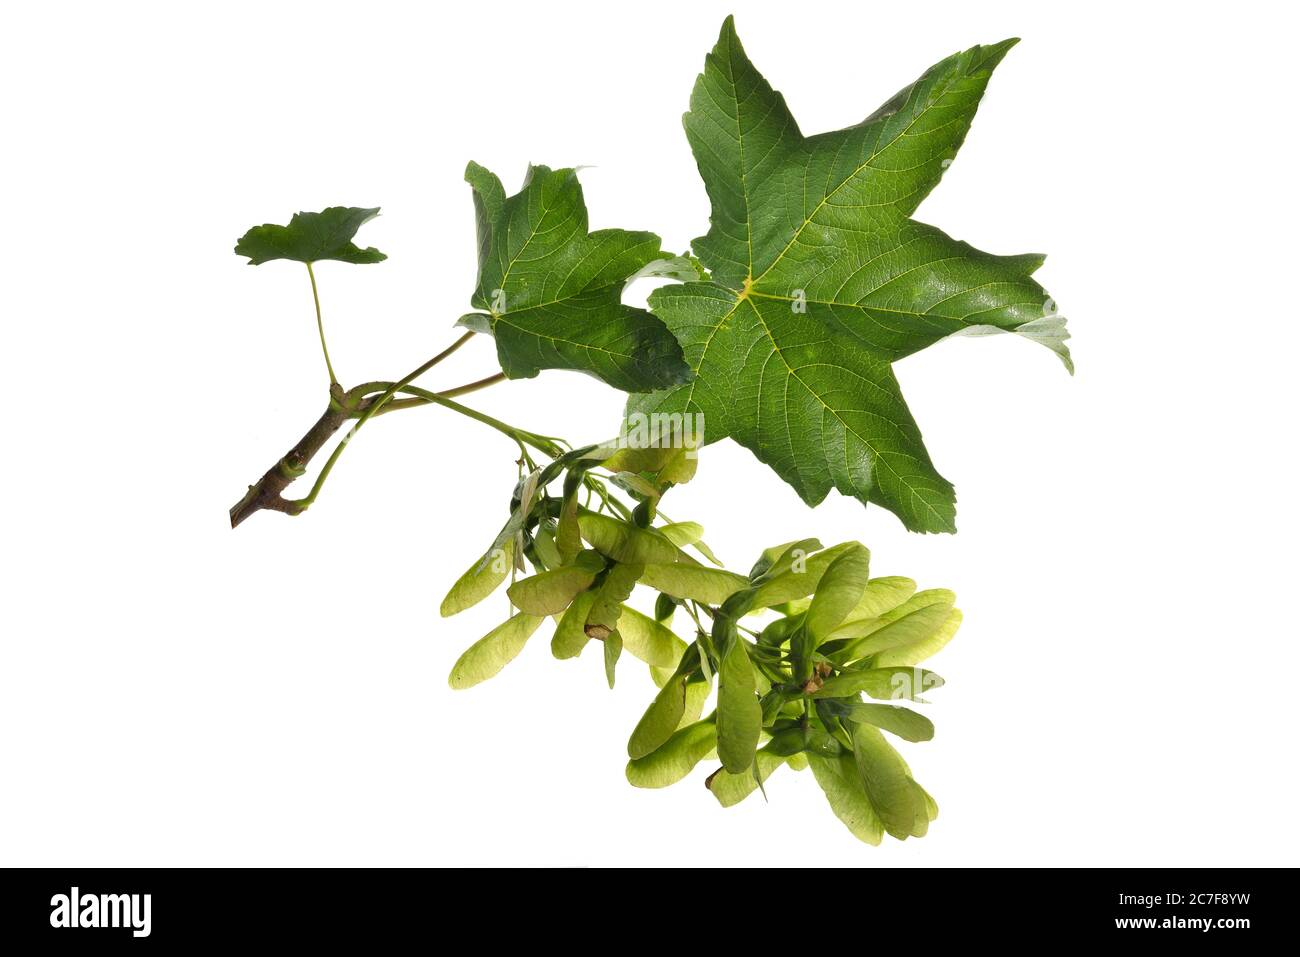 Maple leaf with fruiting, Sycamore maple (Acer pseudoplatanus) on white background, Germany Stock Photo